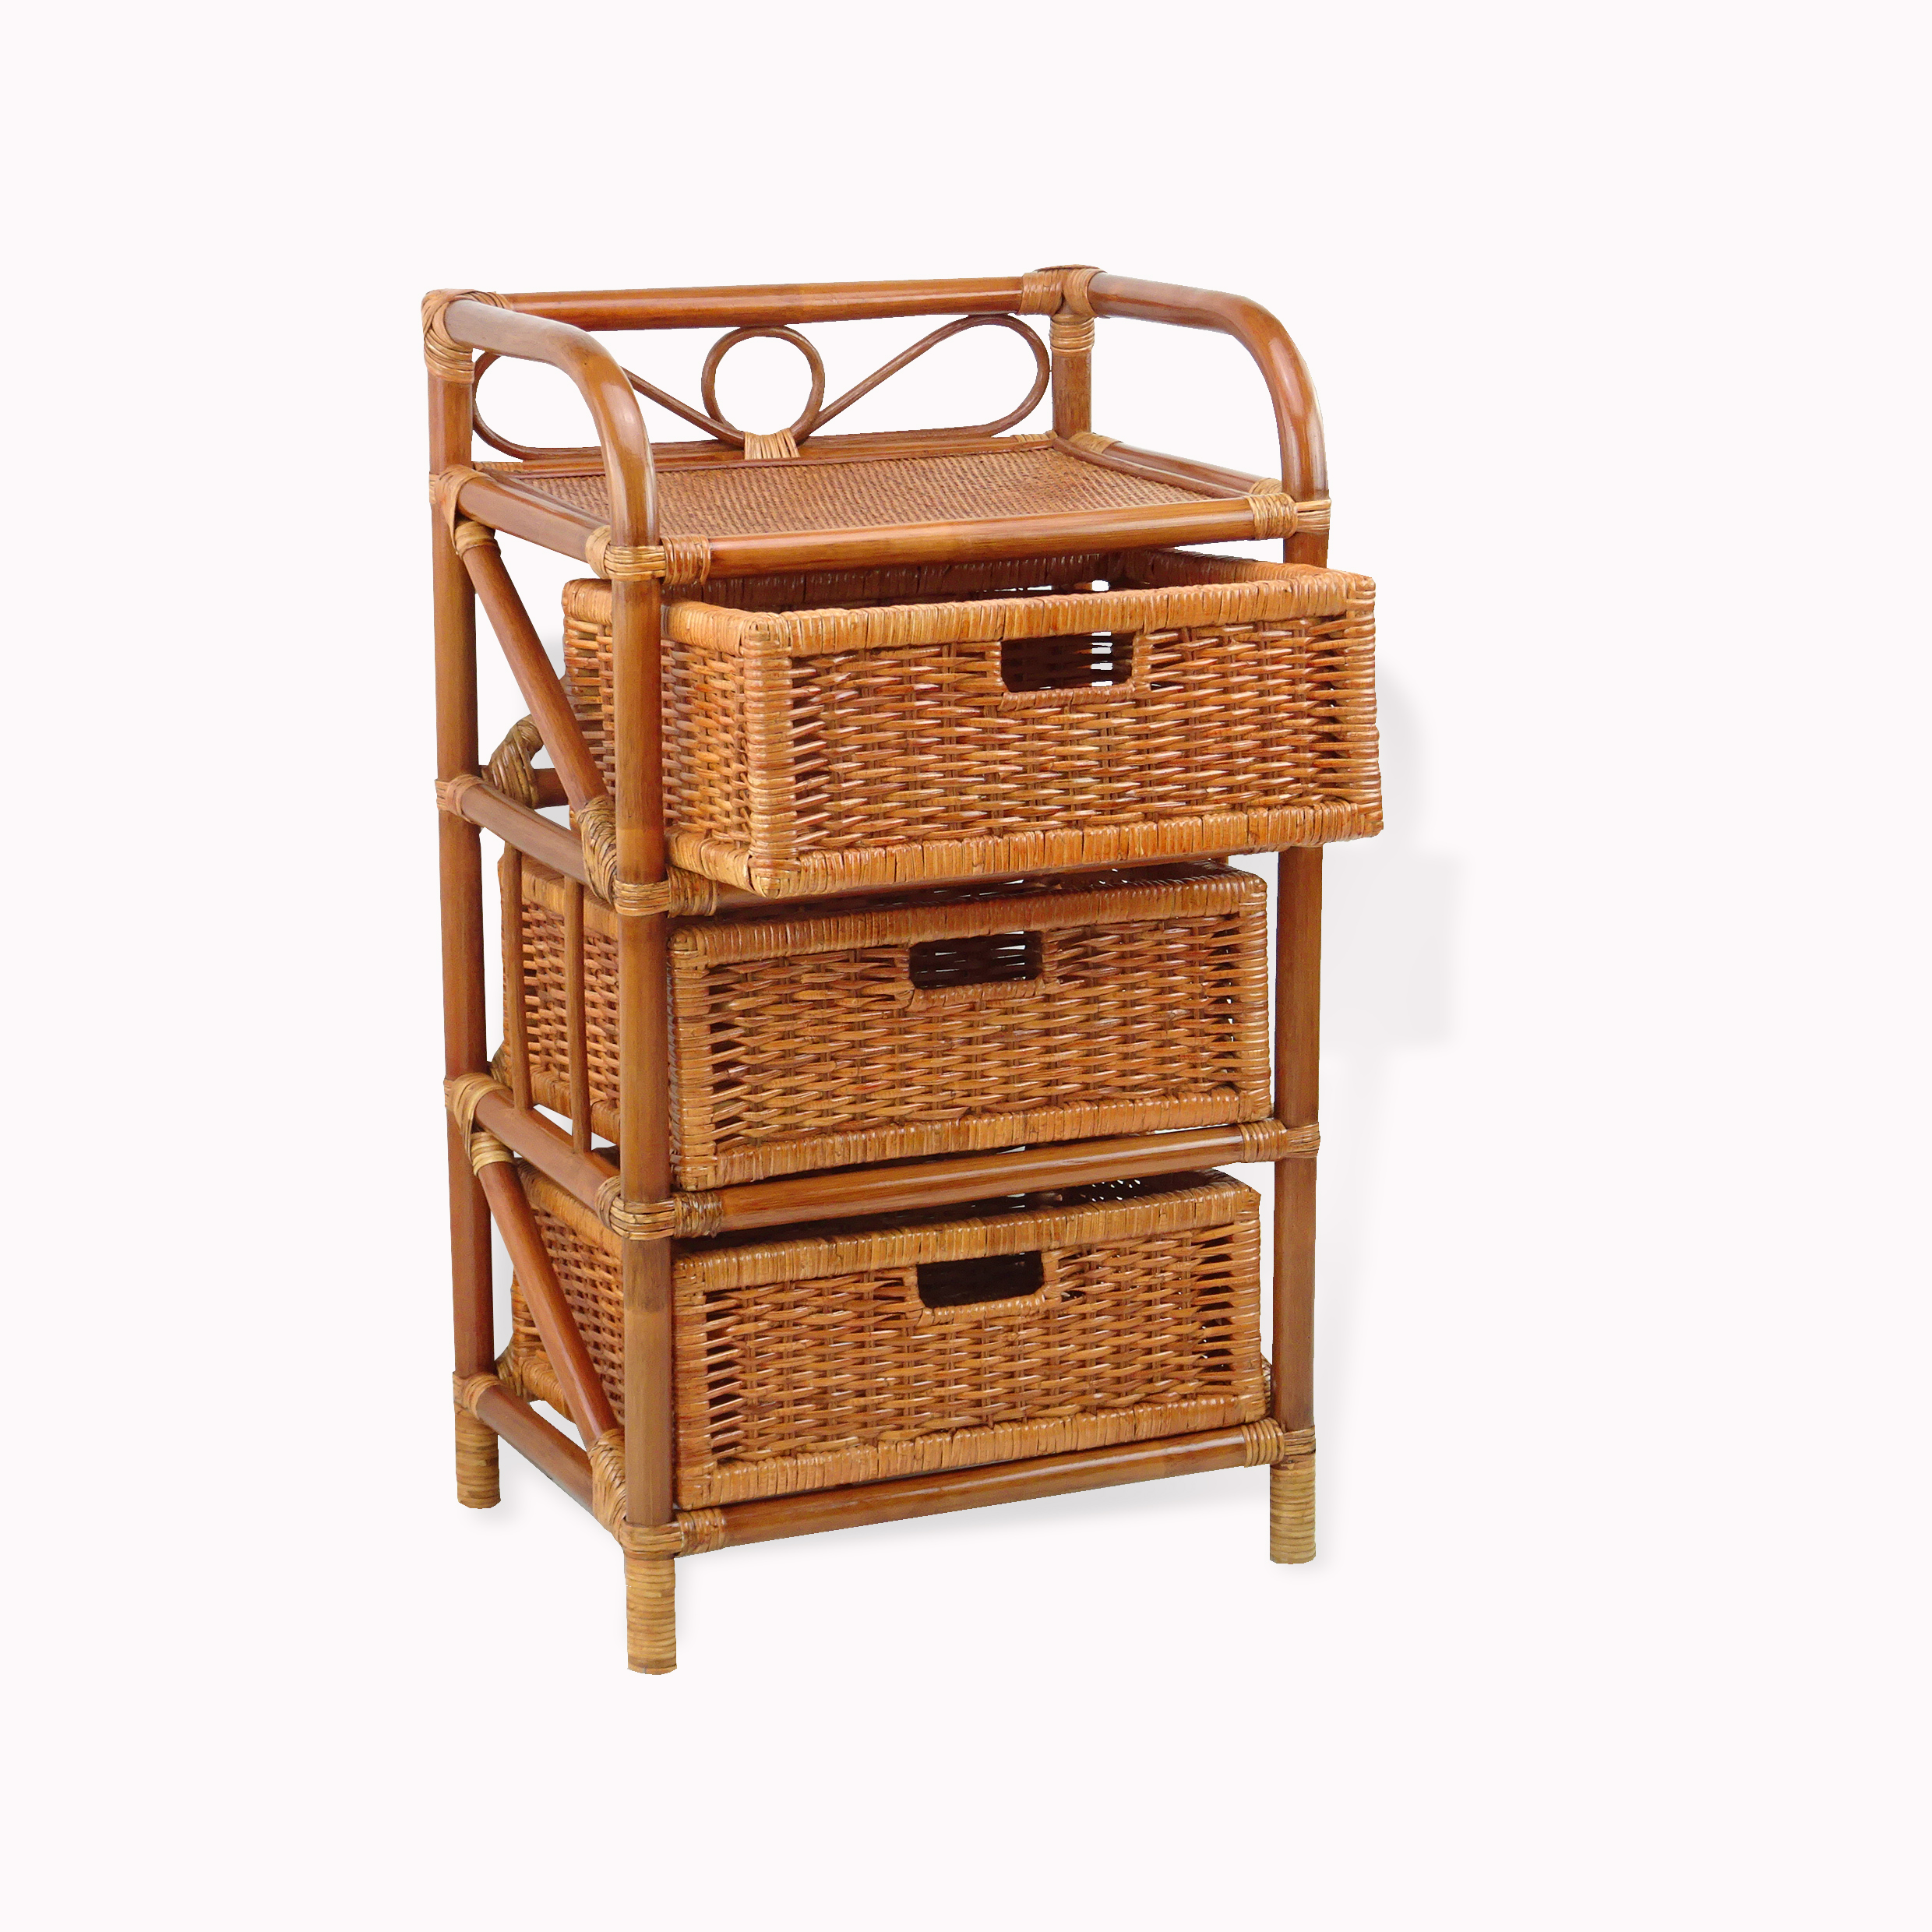 Buy Laundry Chest w/ 3 Drawers Natural Rattan Wicker Handmade in USA